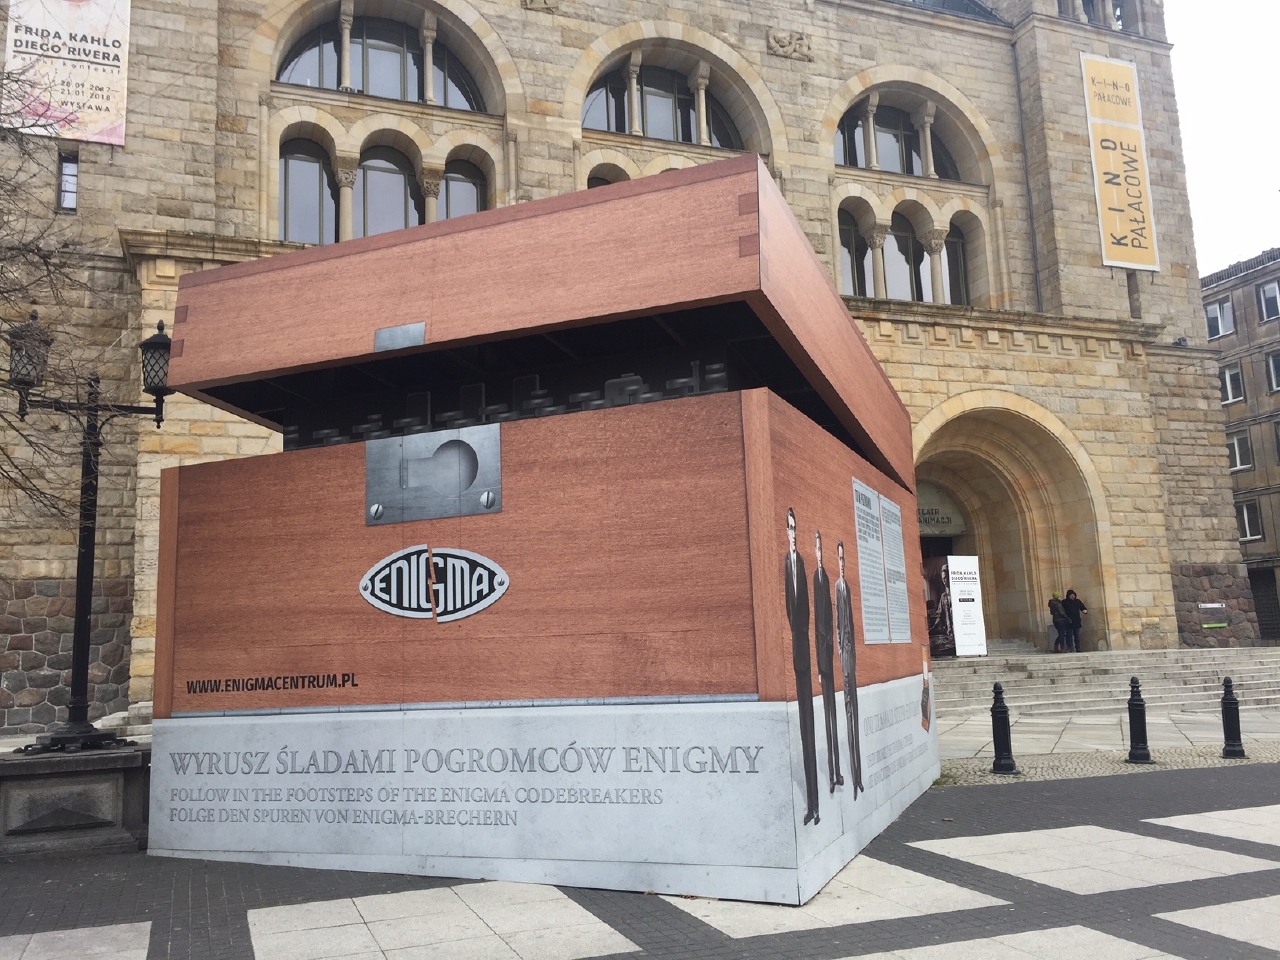 The Enigma information container in front of the original university building